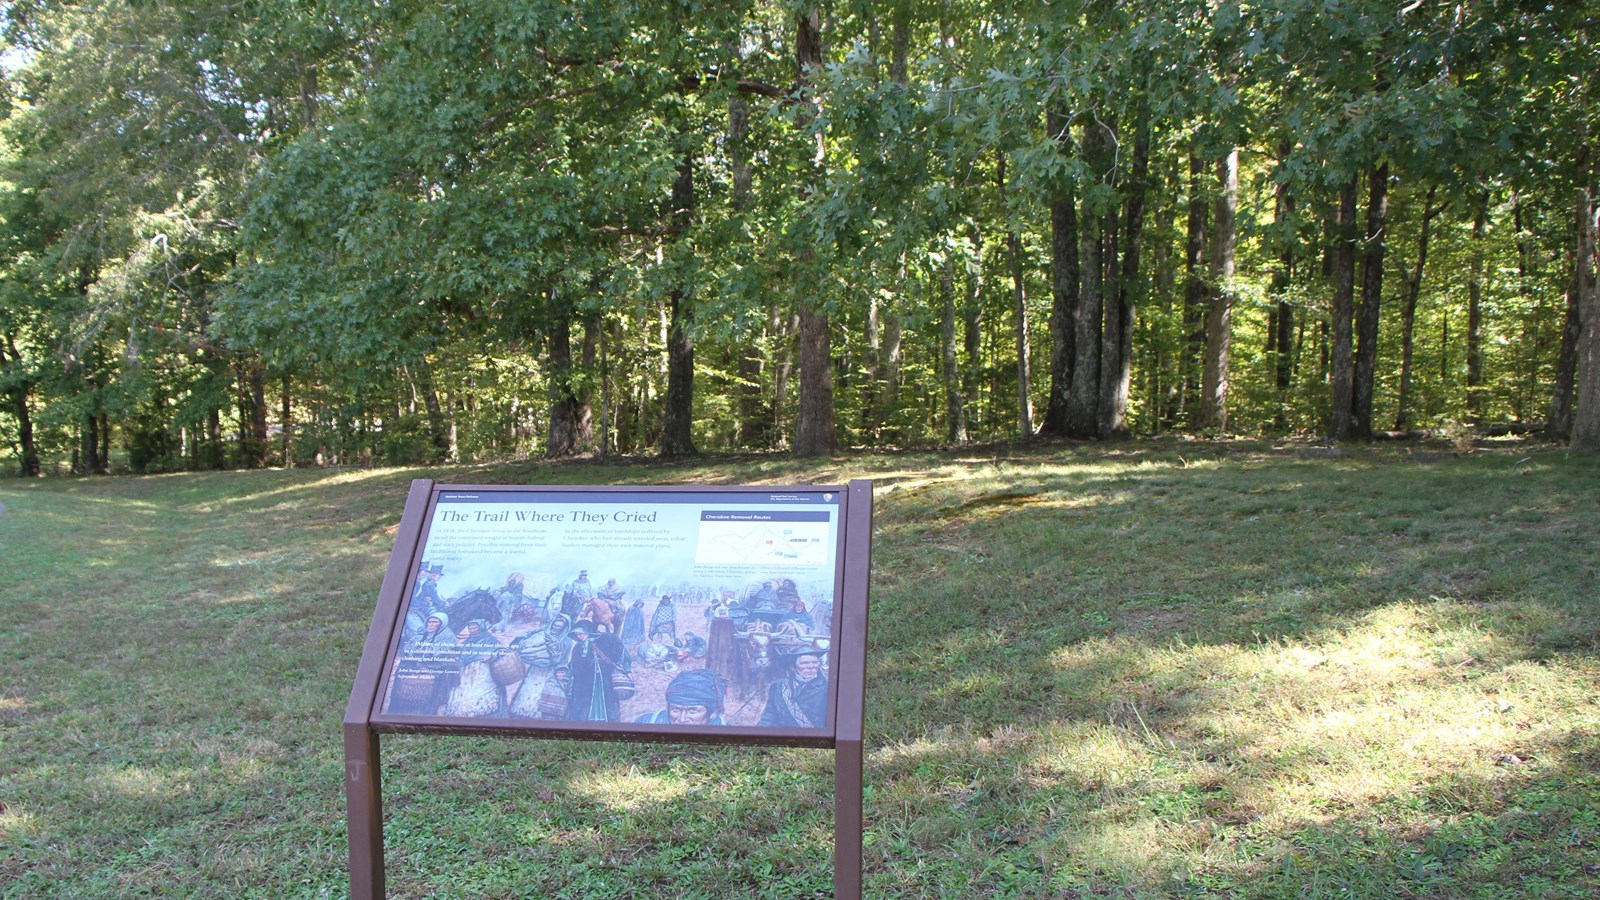 information panel in foreground about Trail of Tears. Grass area and then forest are behind wayside.